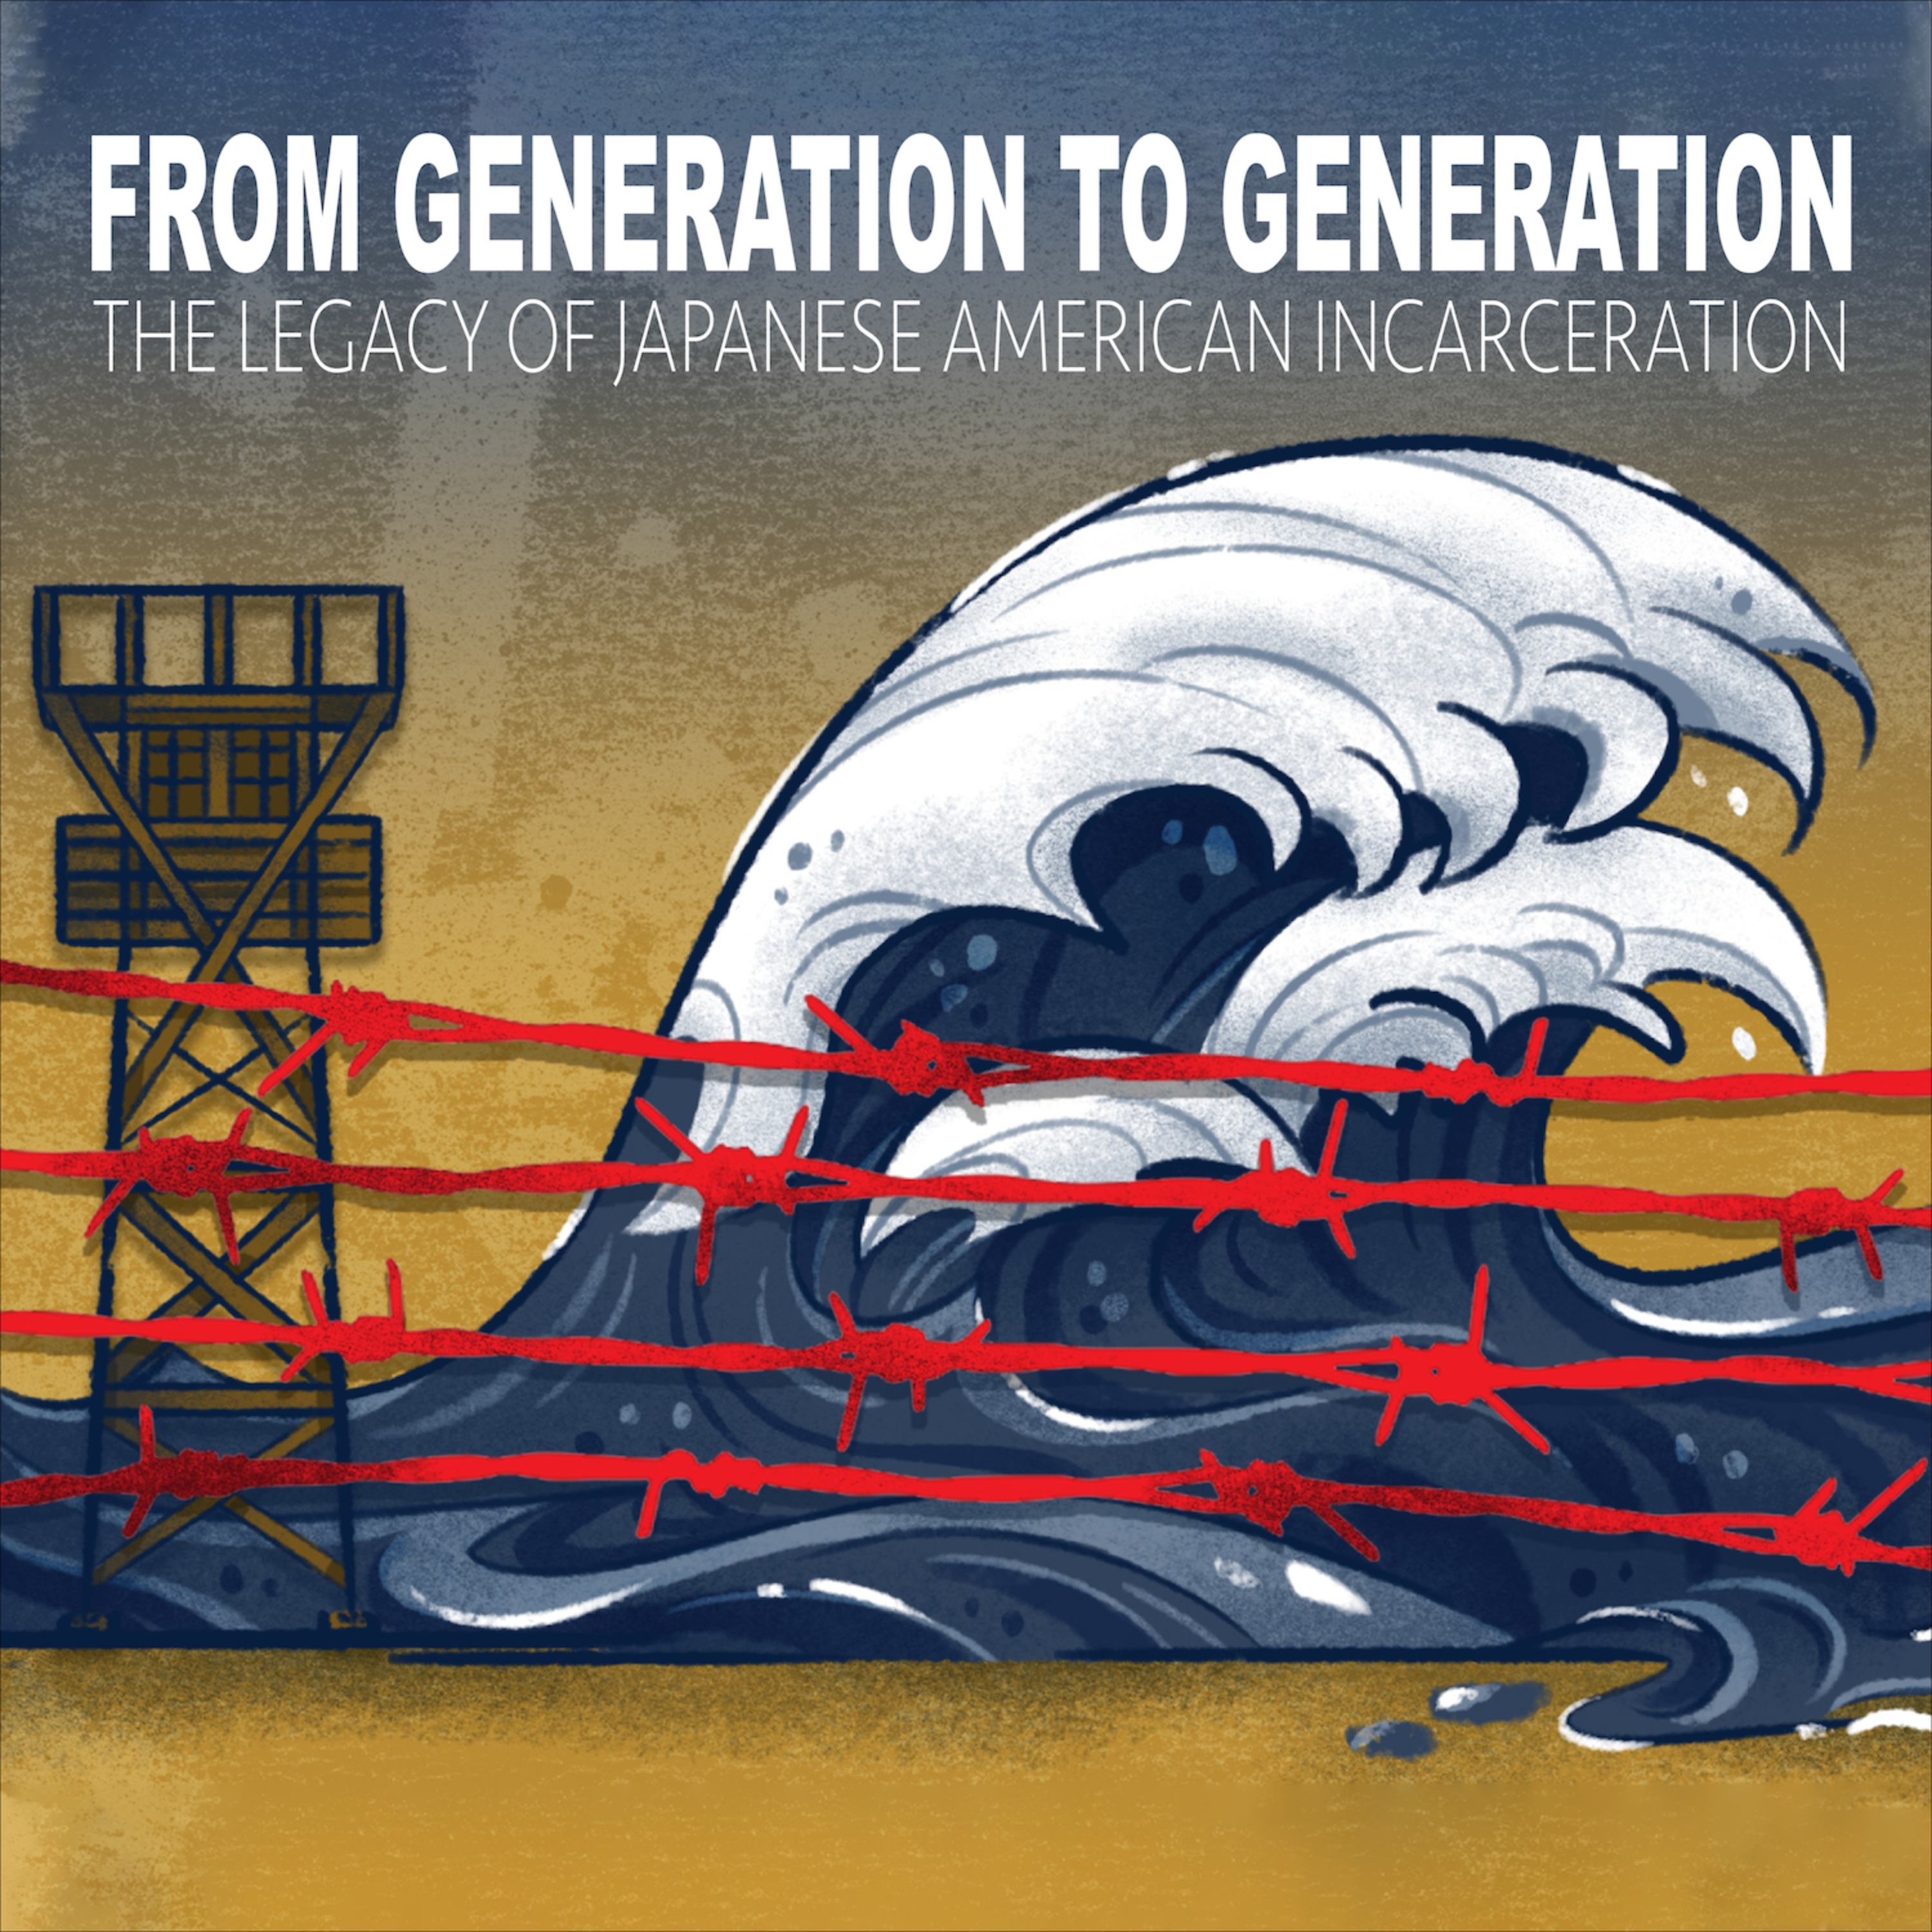 116: How WWII incarceration fueled generations of Japanese American activists